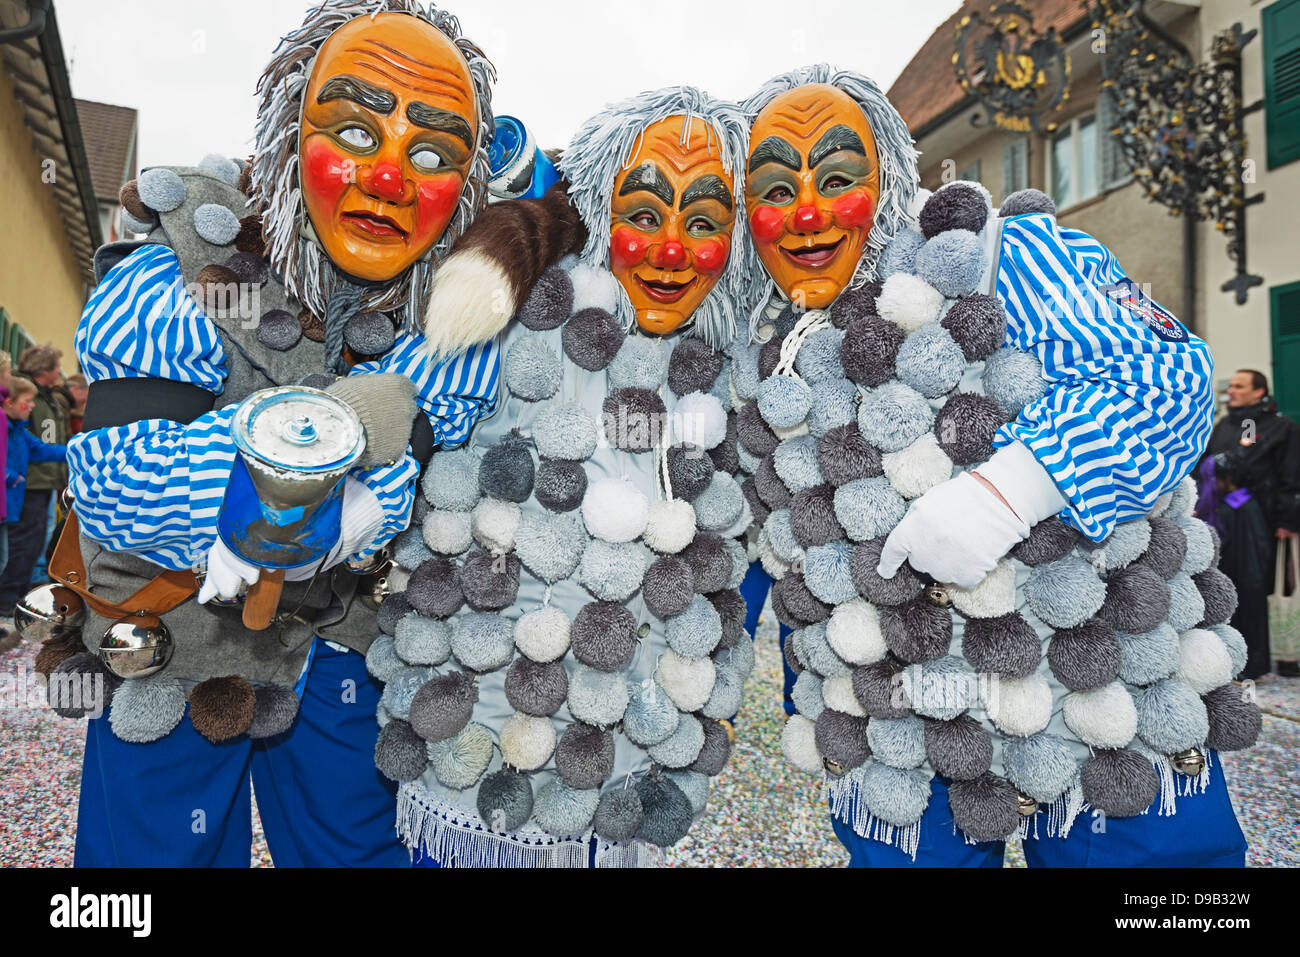 Europe, Germany, Weil am Rhein, Fasnact spring carnival parade Stock Photo